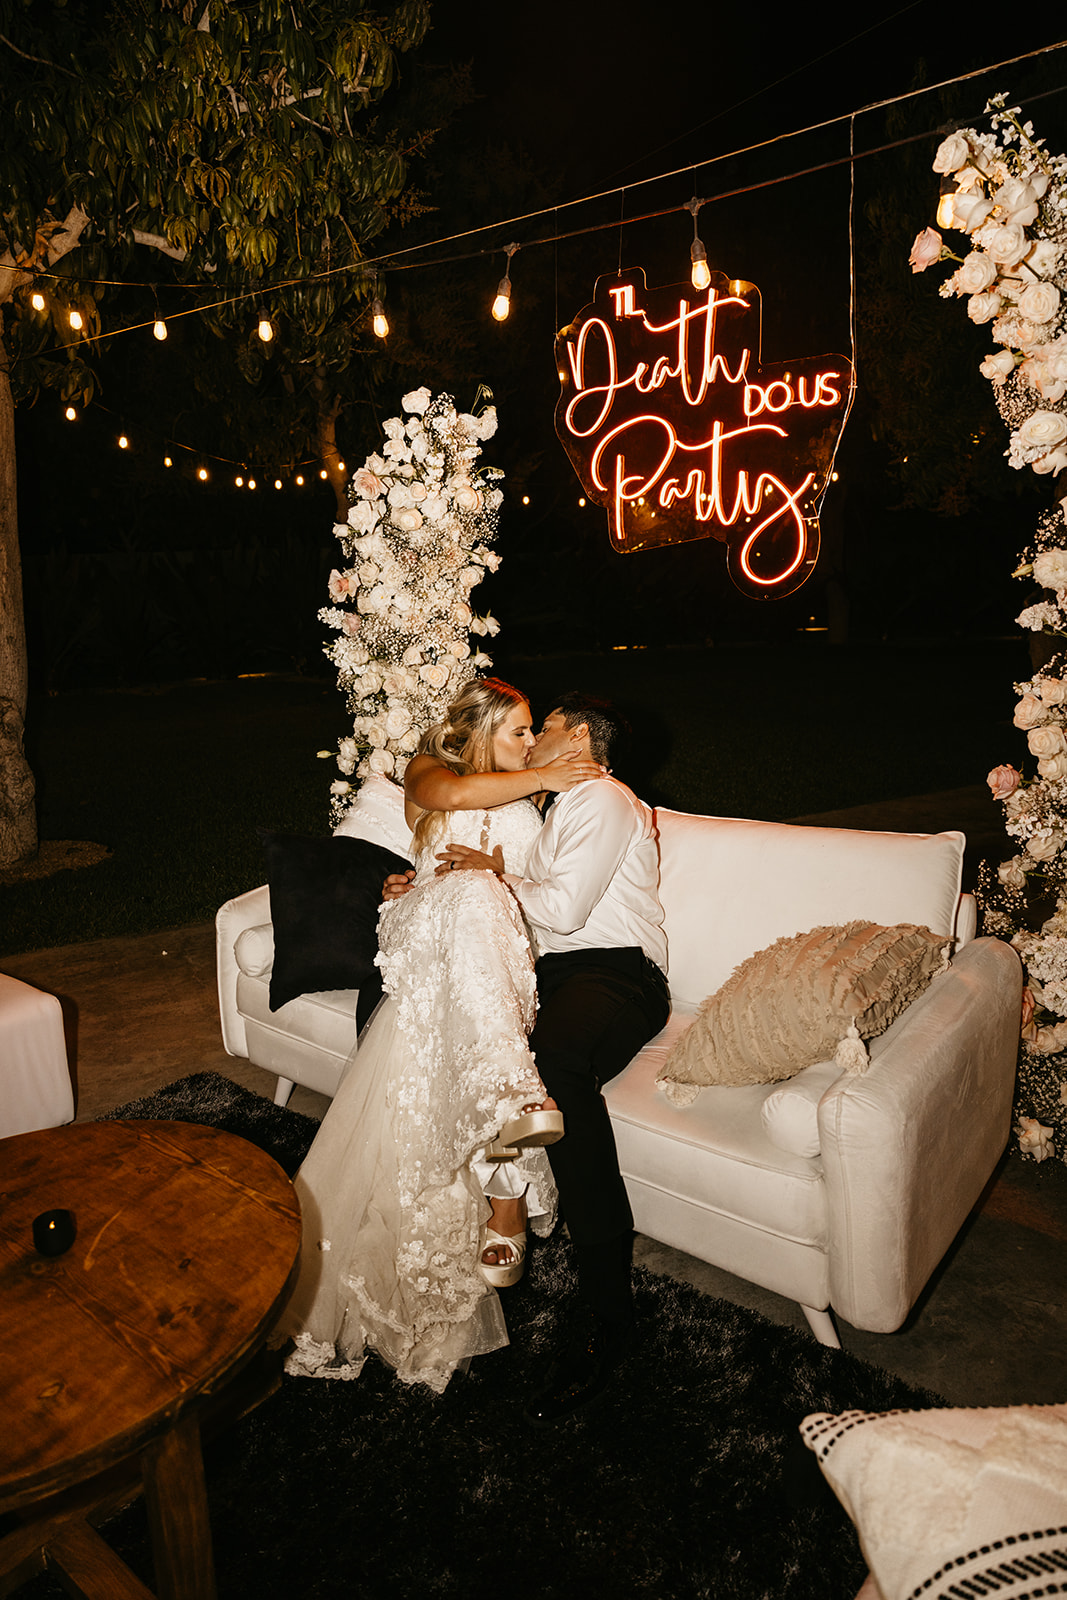 Bride & groom kiss under their "til death do us party" neon sign during their reception at Acre Resort in Cabo